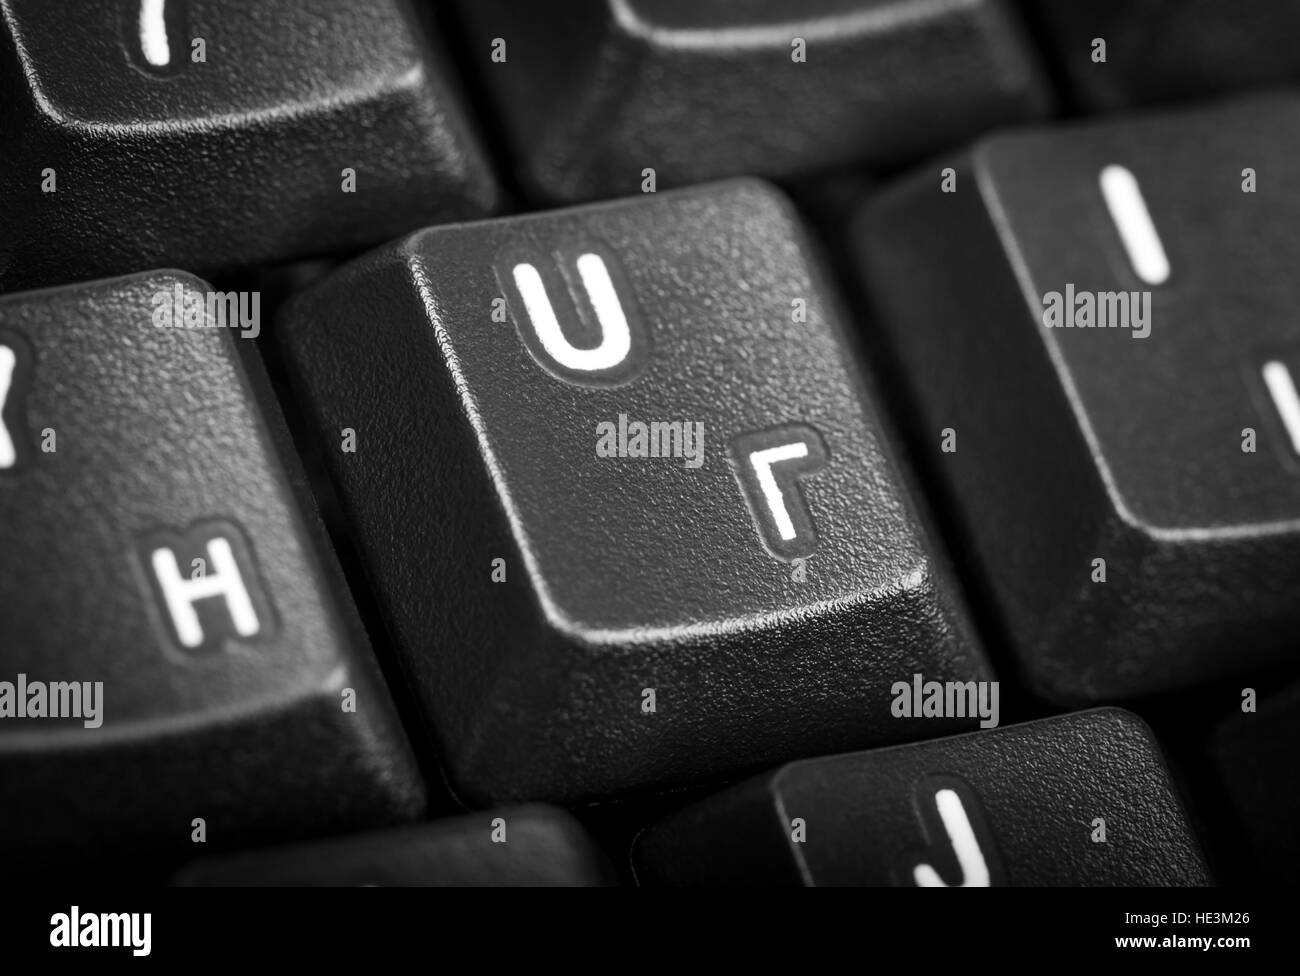 Electronic collection - detail black computer keyboard with russian letter. Focus on the center key. Stock Photo